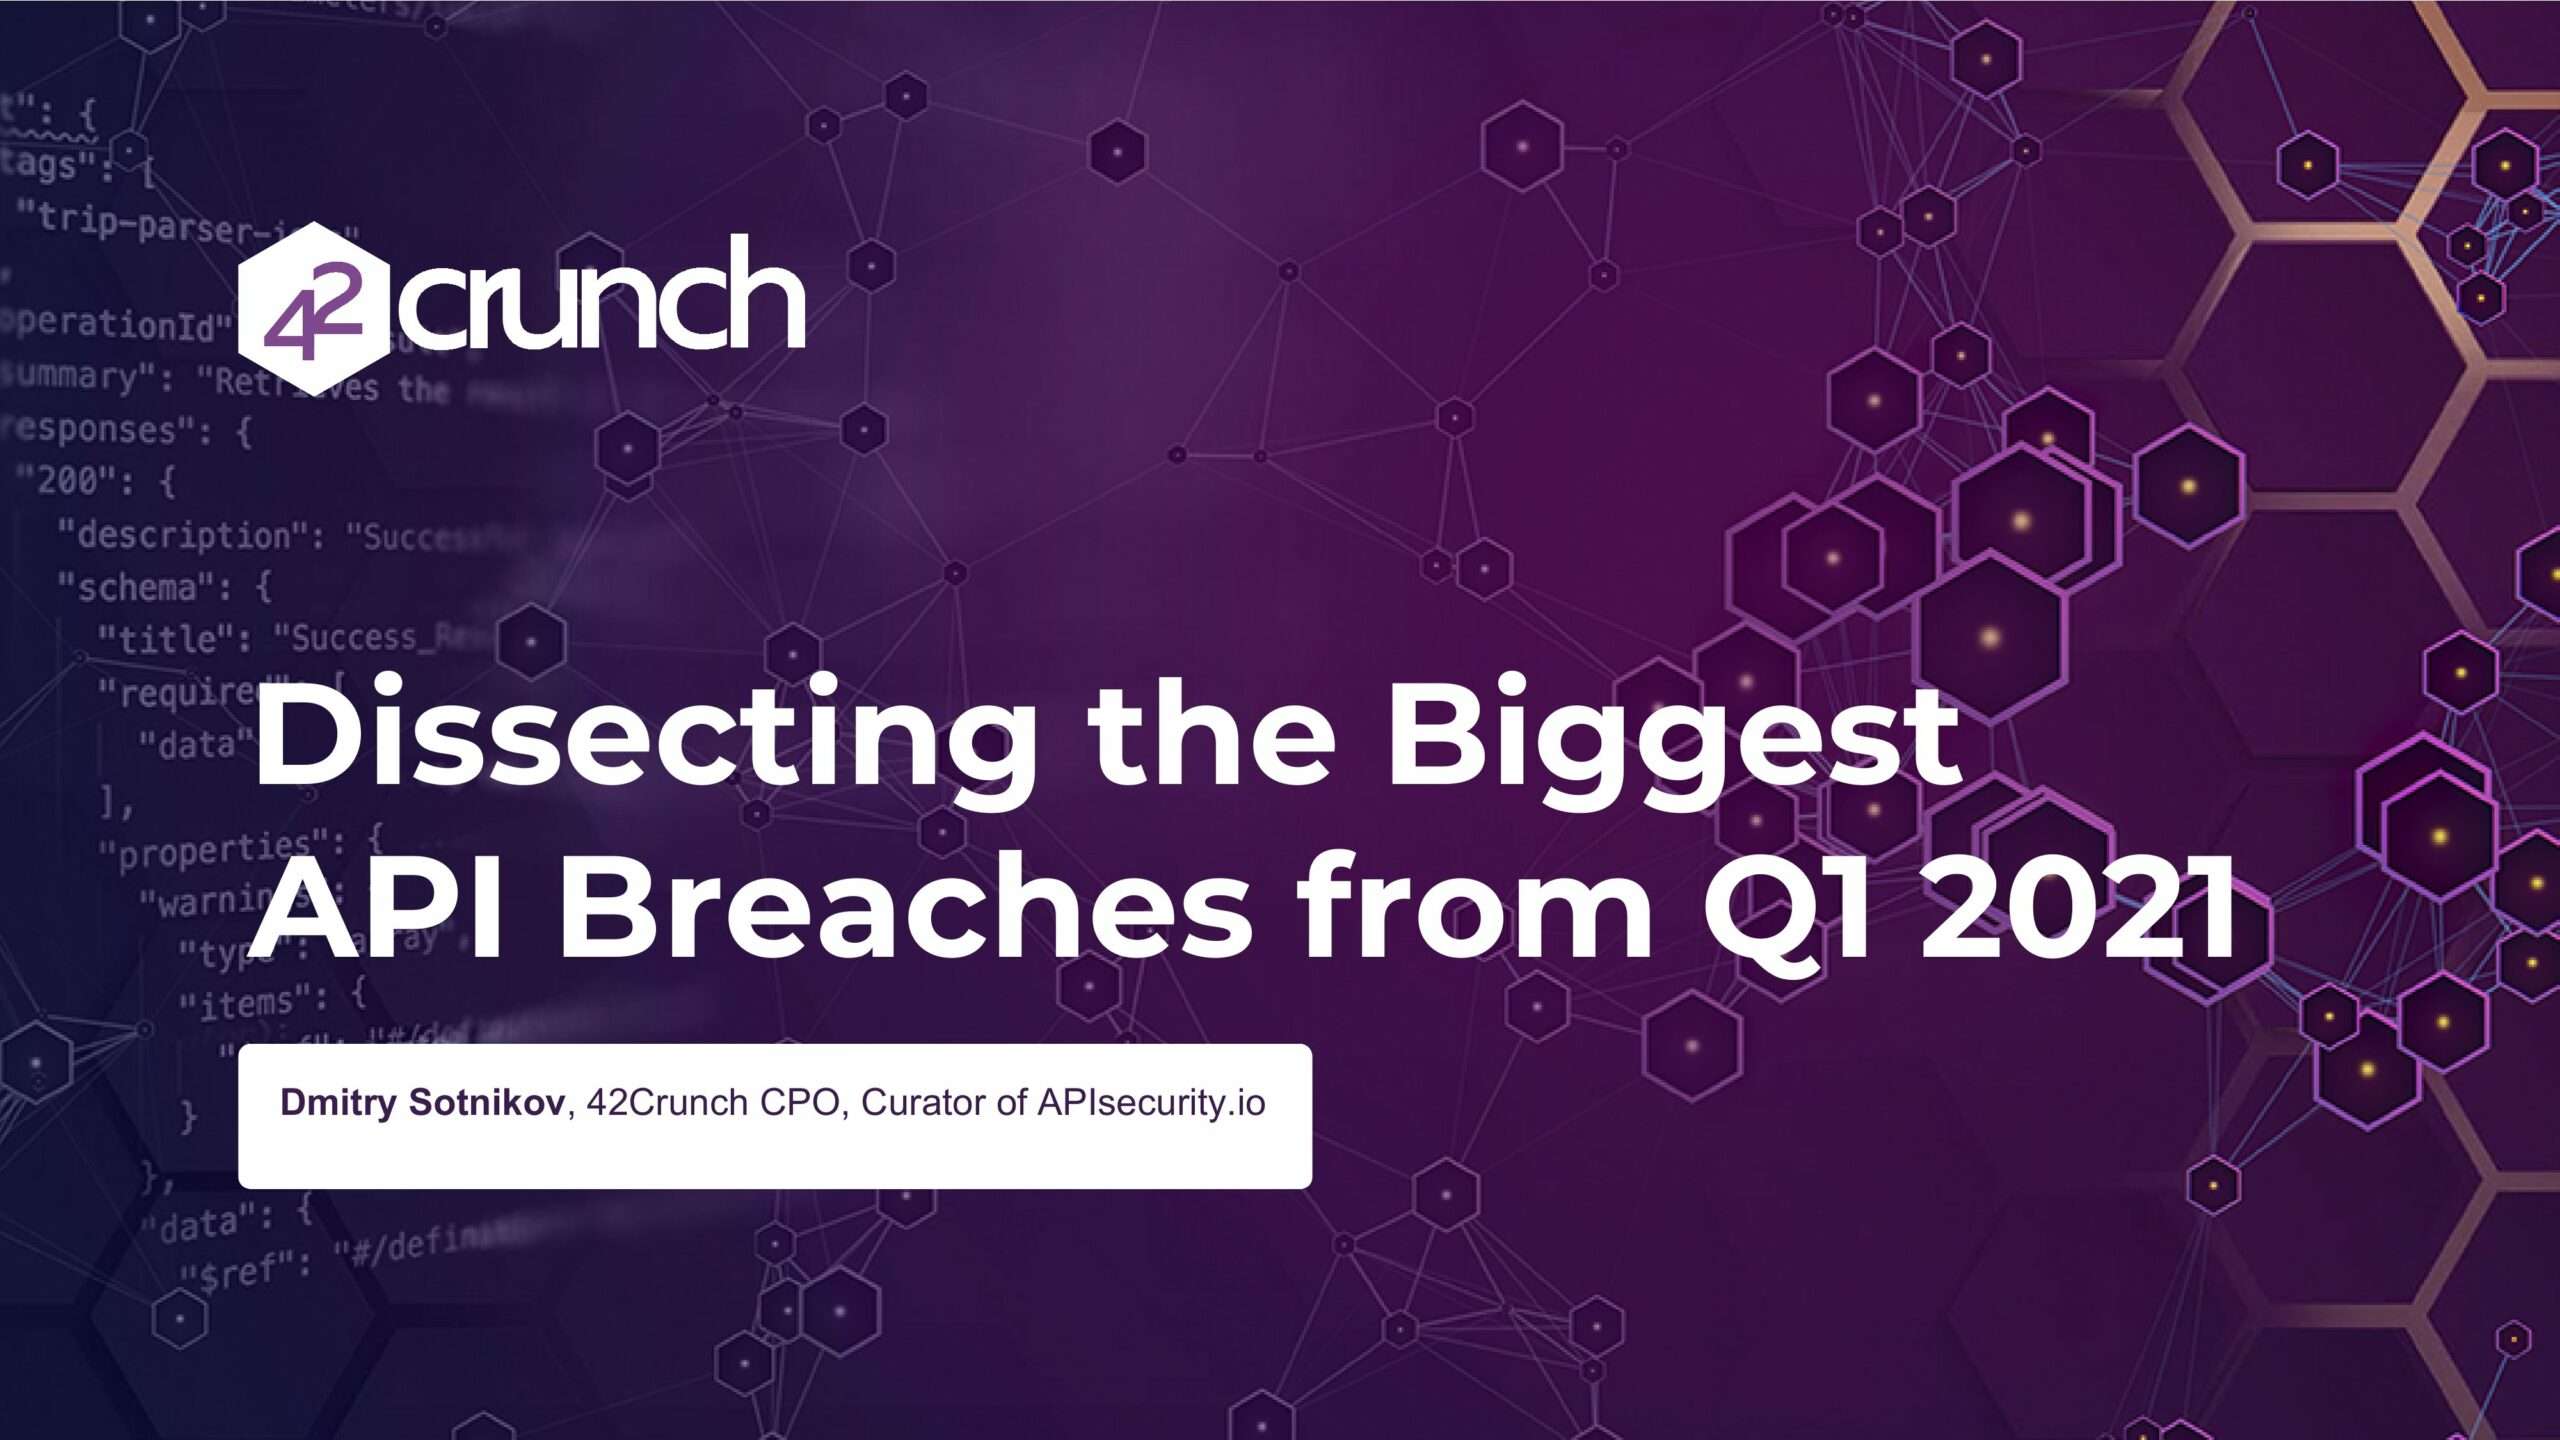 webinar-dissecting-biggest-API-breaches-from-Q1-20210001-00